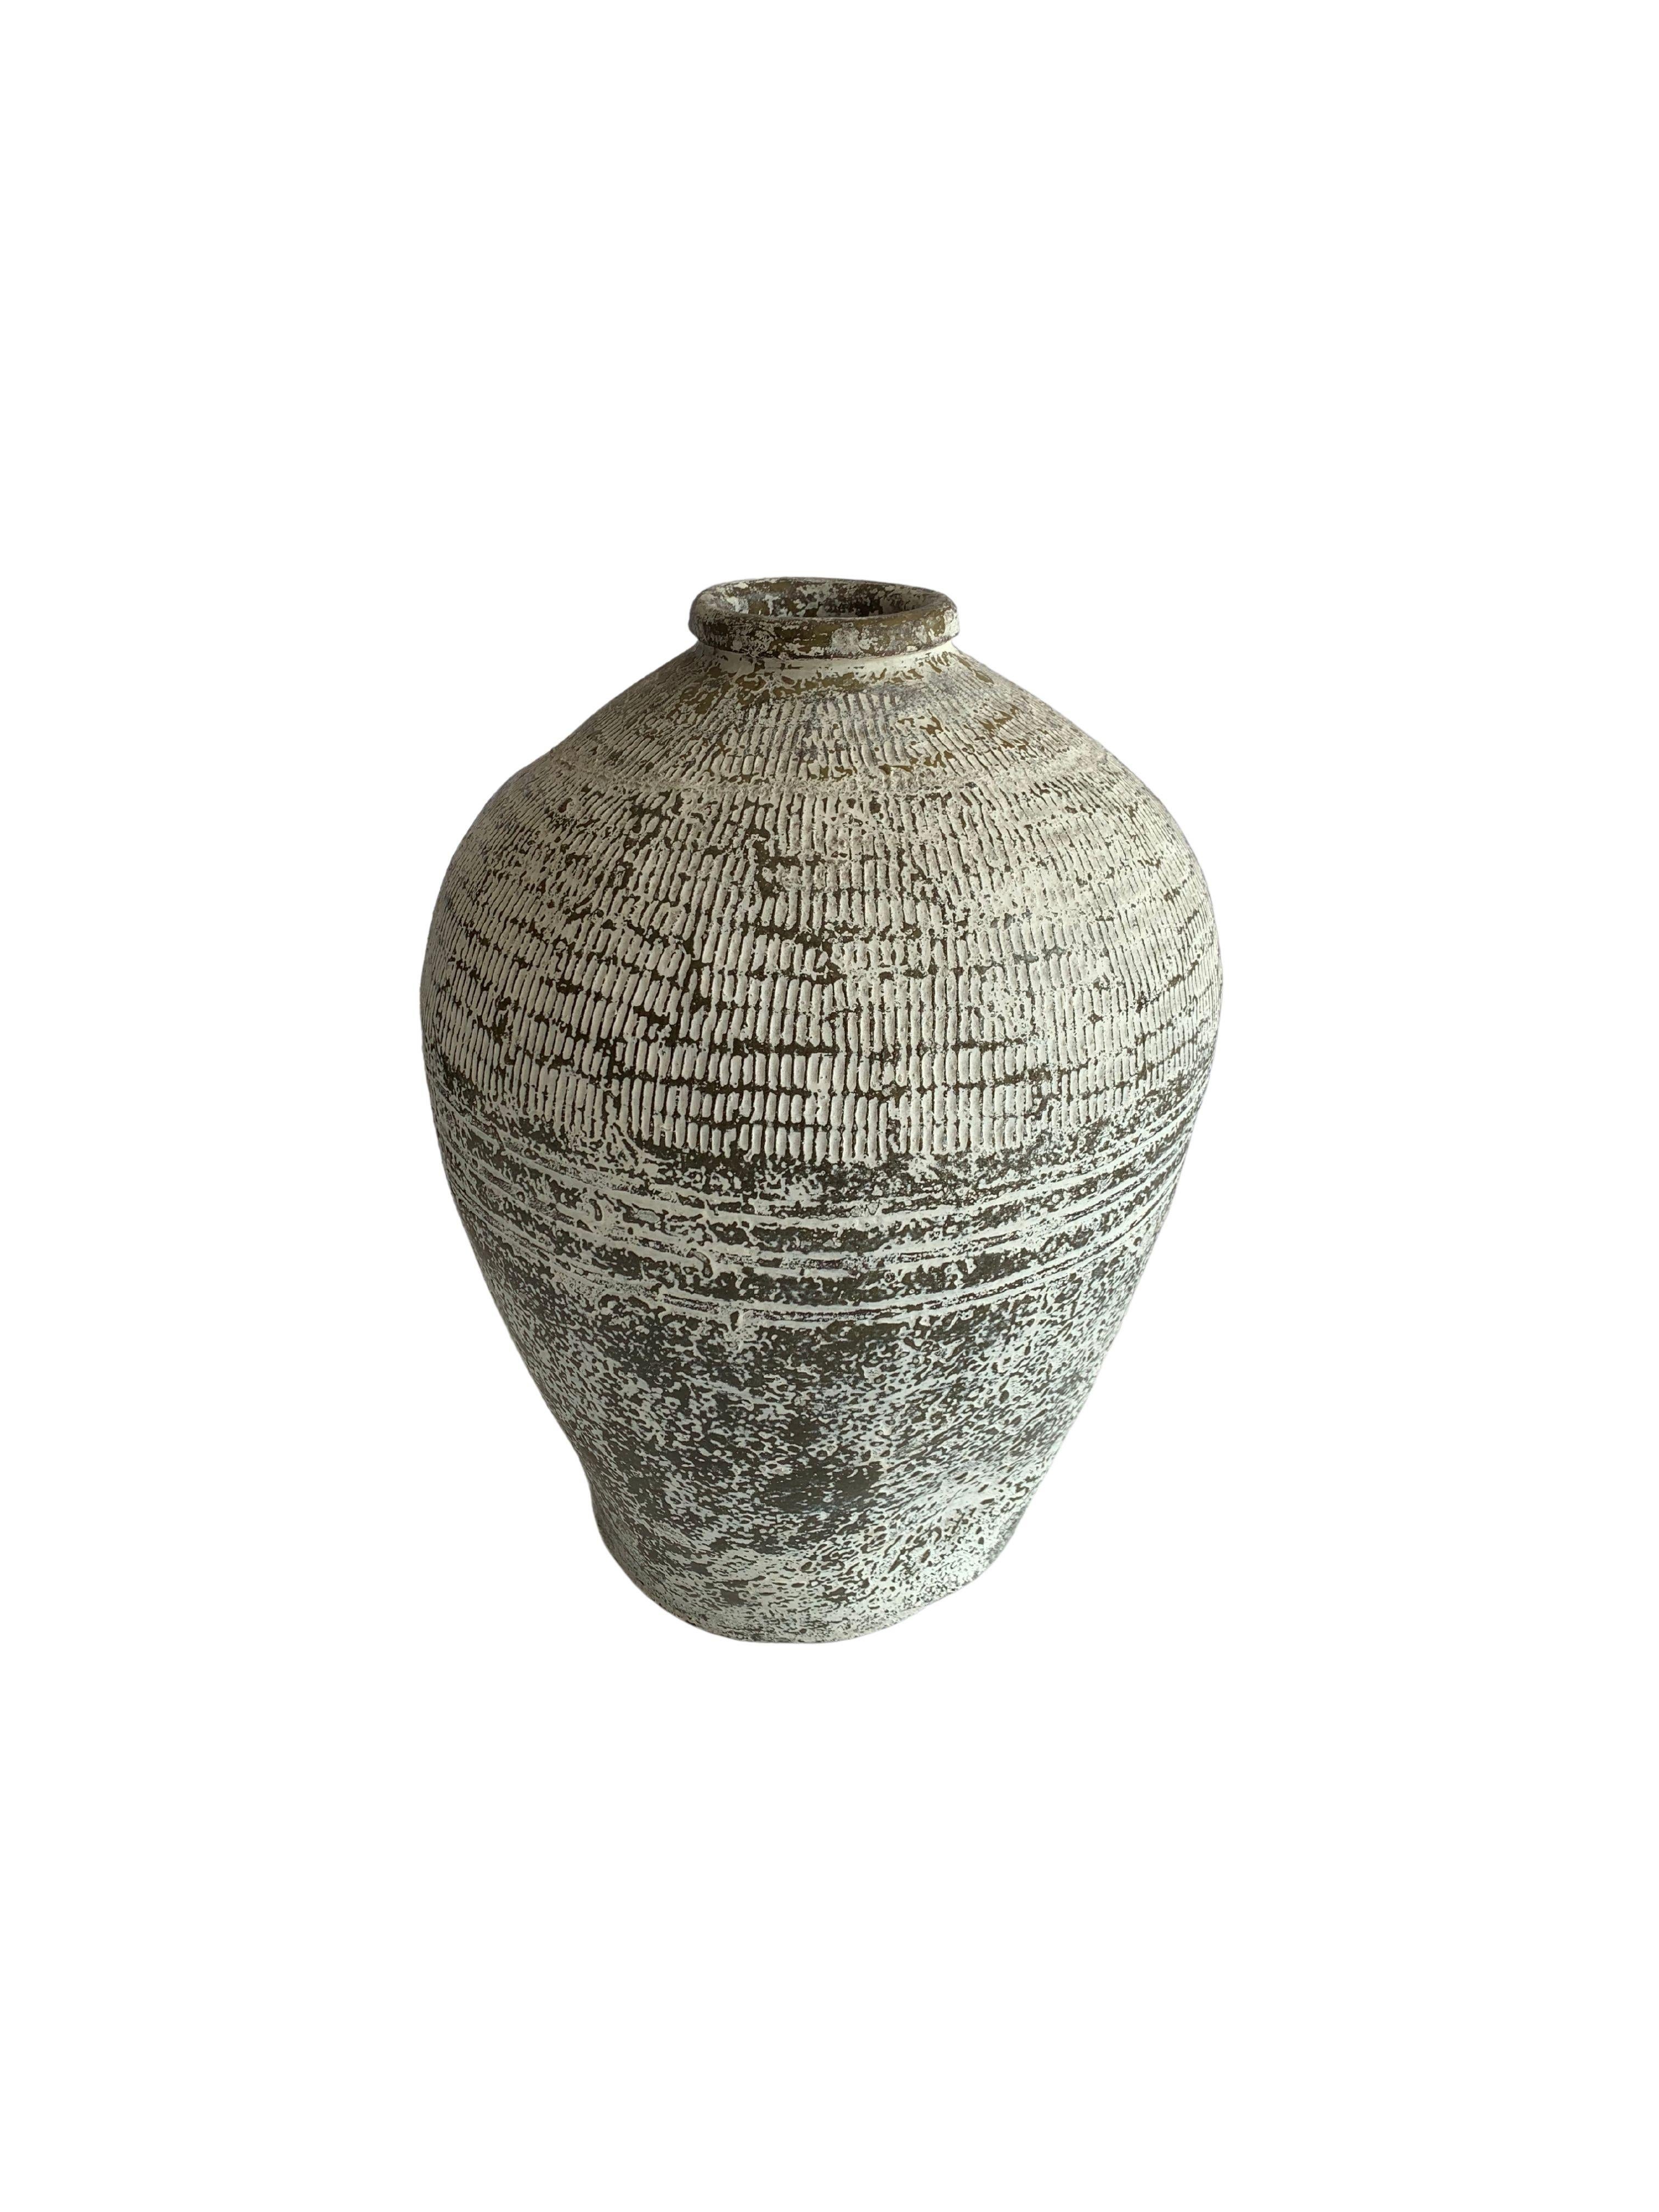 This vintage glazed Chinese ceramic jar from mid 20th Century was once used for pickling foods. It features a jade green finish and outer surface that features a ribbed texture. This jar has been given a newly added washed out white paint finish to